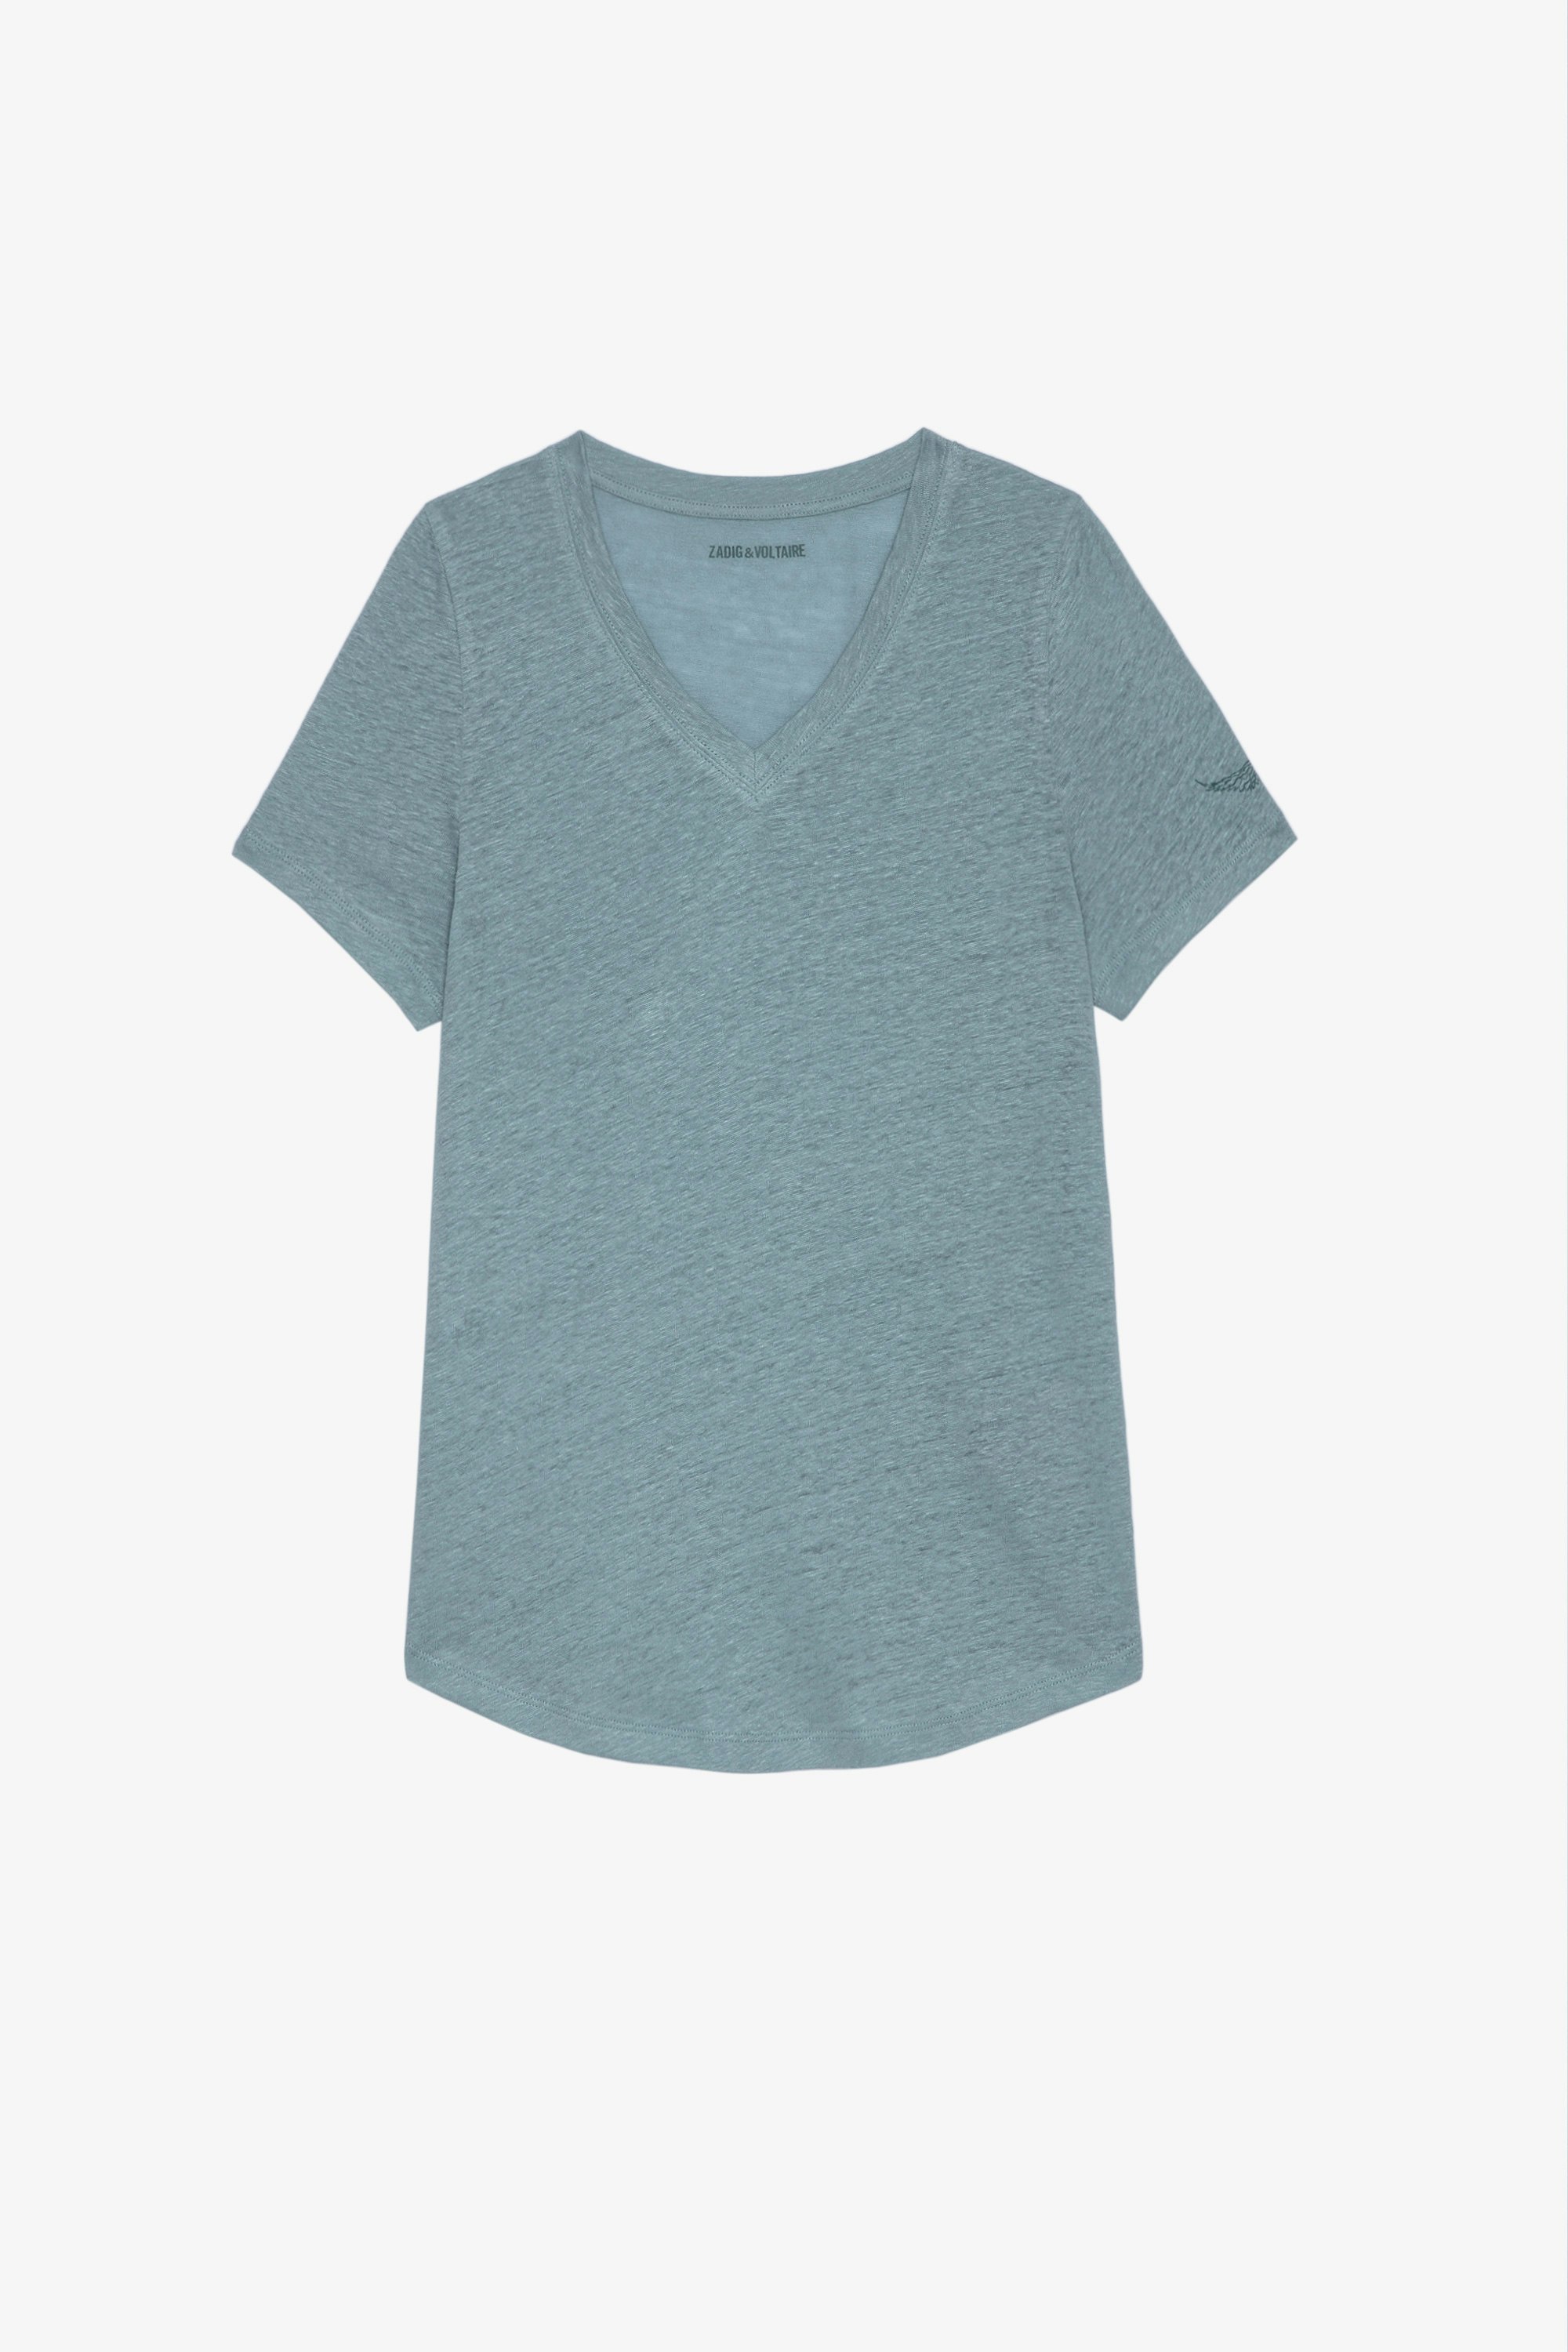 Atia Wings Ｔシャツ Women’s light blue cotton T-shirt with V neckline and long sleeves